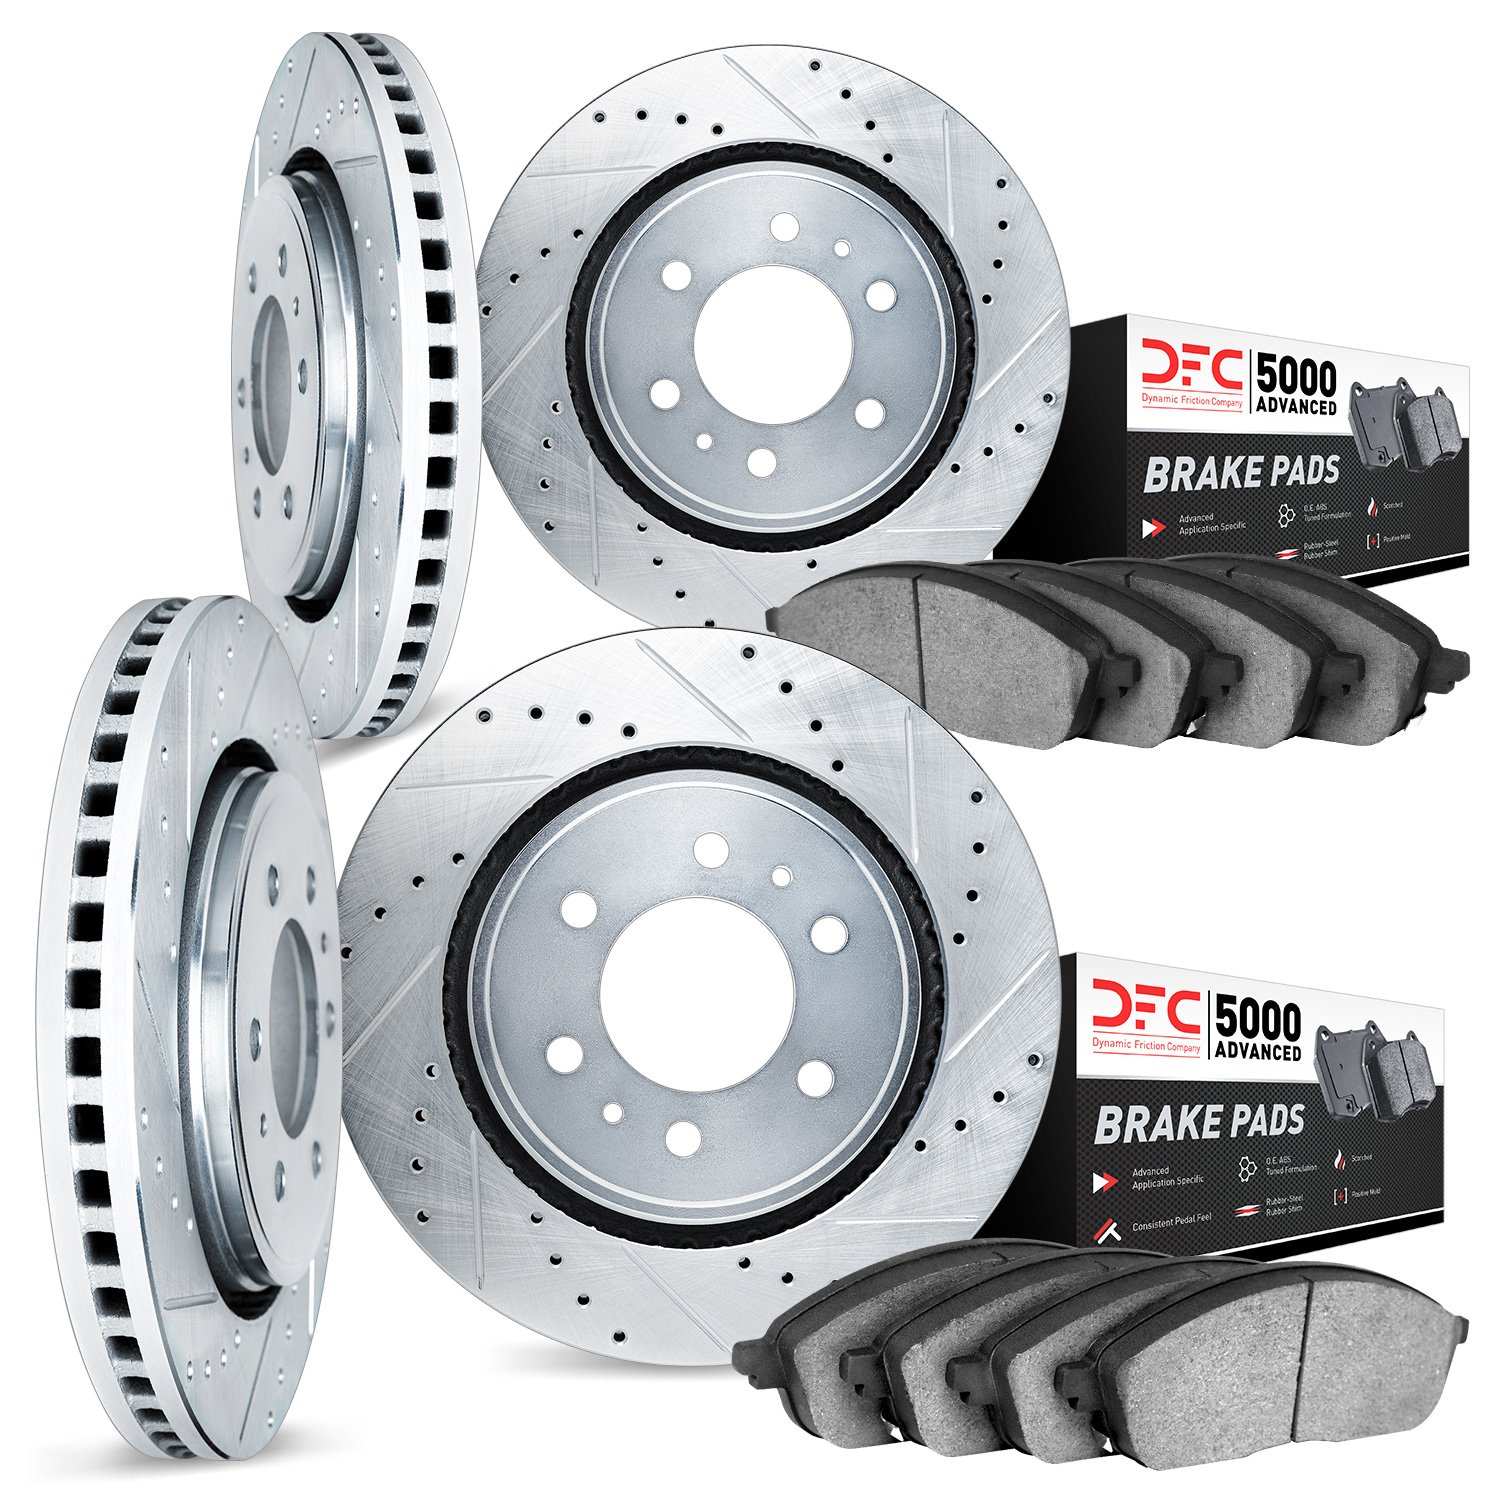 7504-54374 Drilled/Slotted Brake Rotors w/5000 Advanced Brake Pads Kit [Silver], 2018-2021 Ford/Lincoln/Mercury/Mazda, Position: